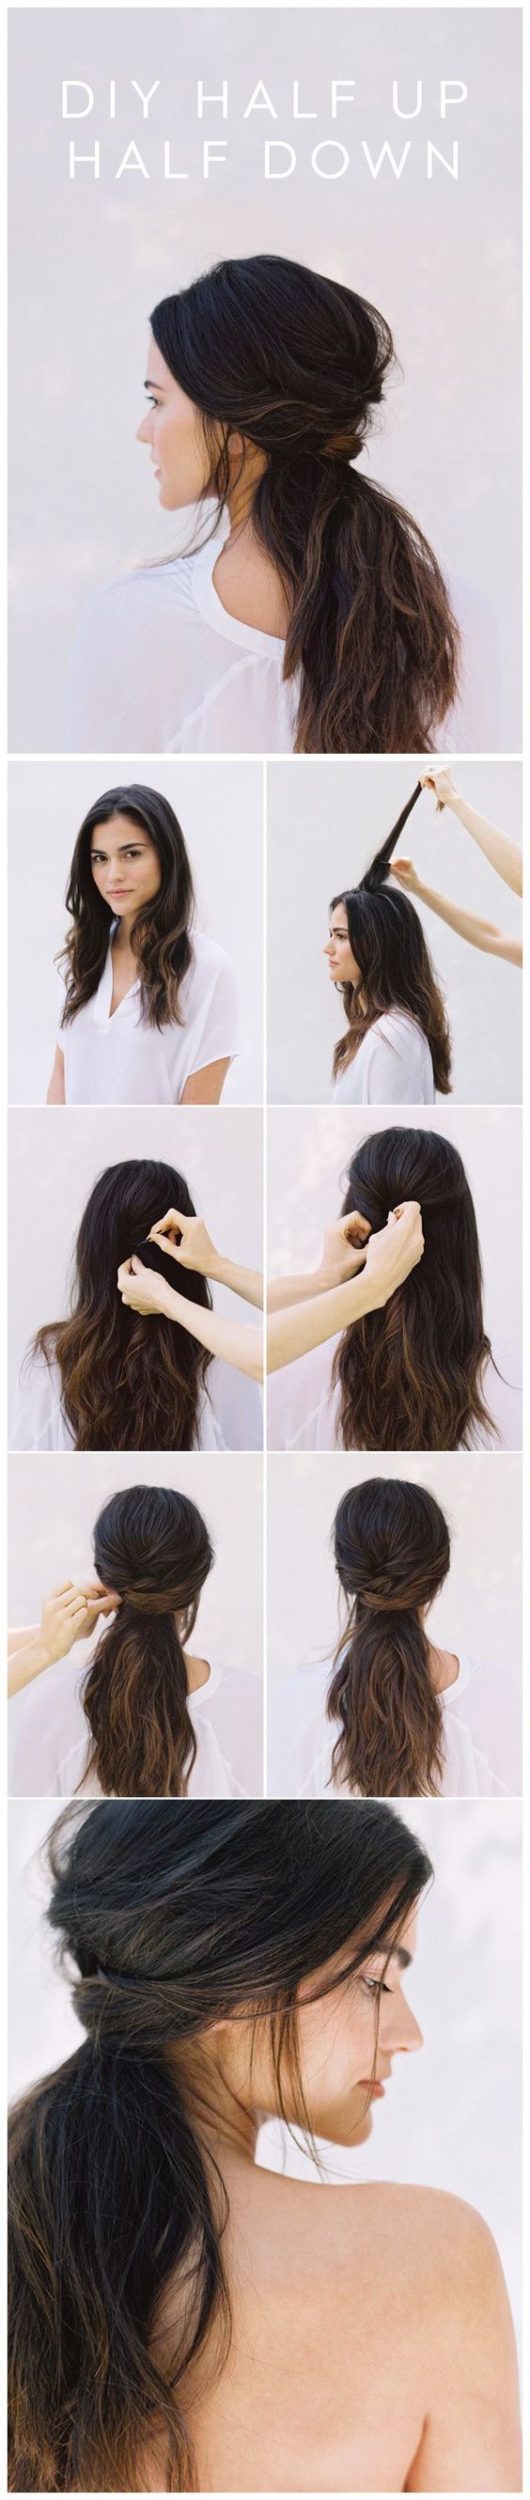 Easy Hairstyle Tutorials For Perfect Long Hair Every Single Day - ALL